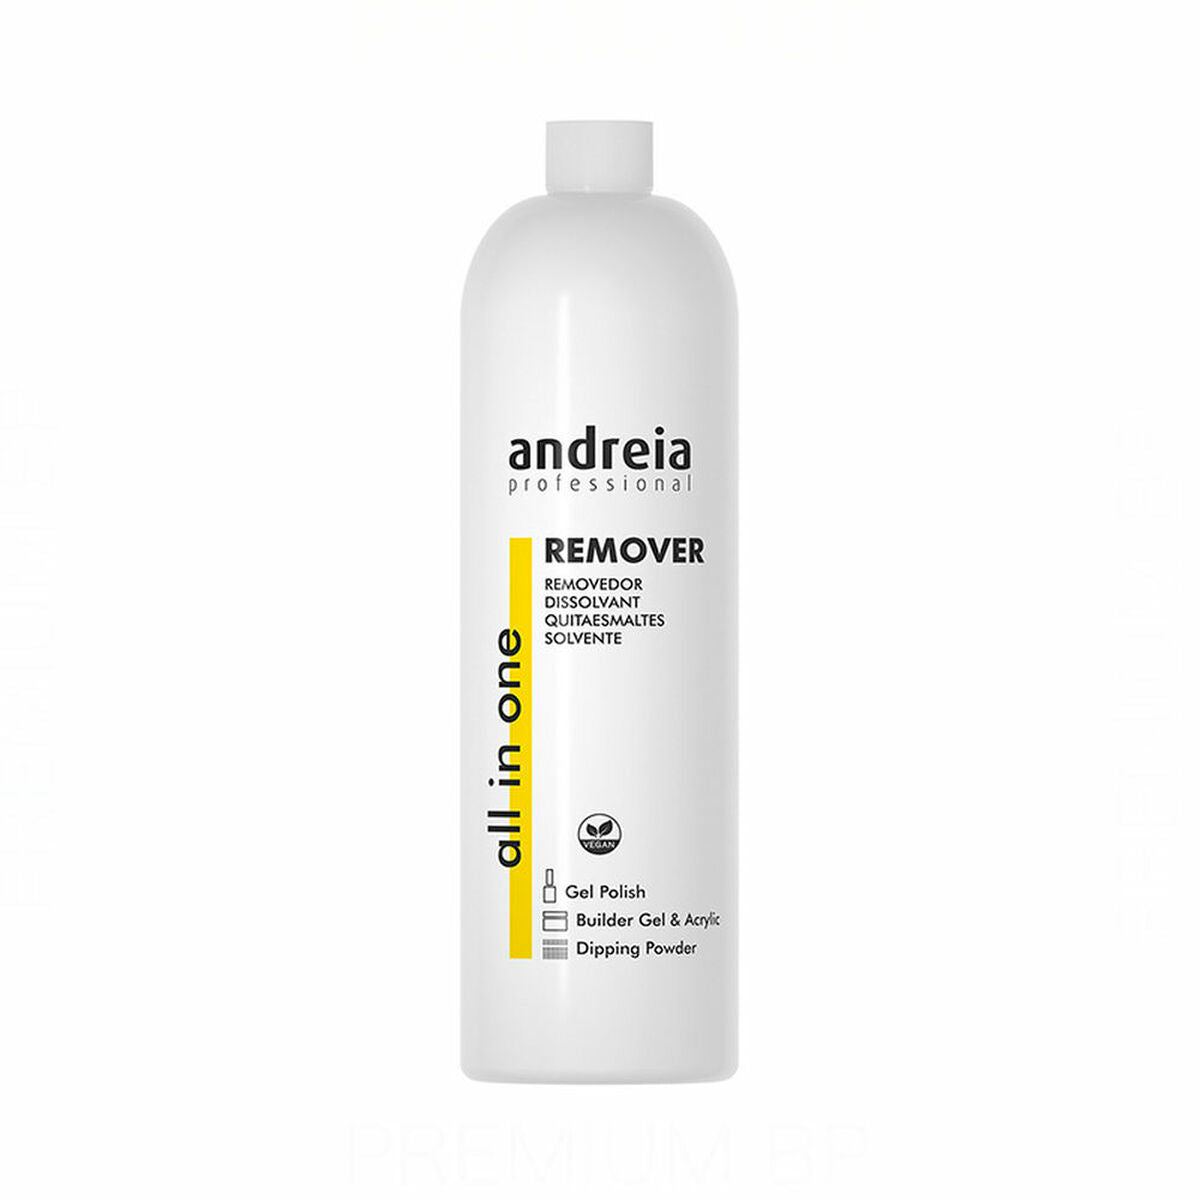 Solpiclo unghie Professional All in One Andreia 1ADPR 1 L (1000 ml)